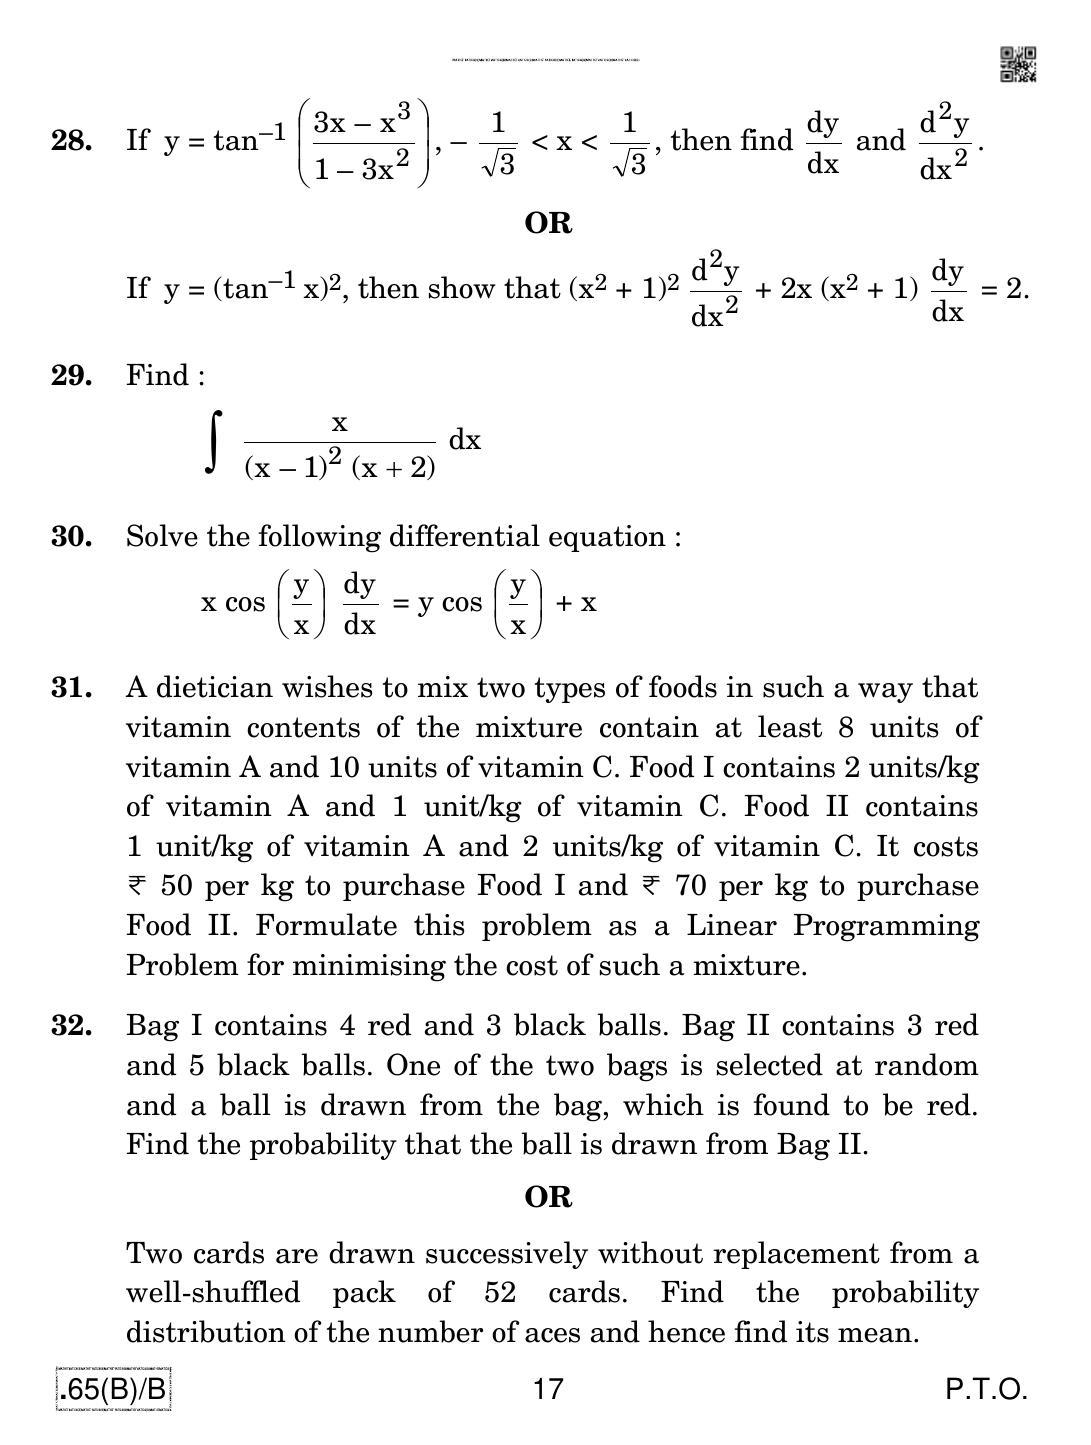 CBSE Class 12 65(B)-C - Maths For Blind Candidates 2020 Compartment Question Paper - Page 17